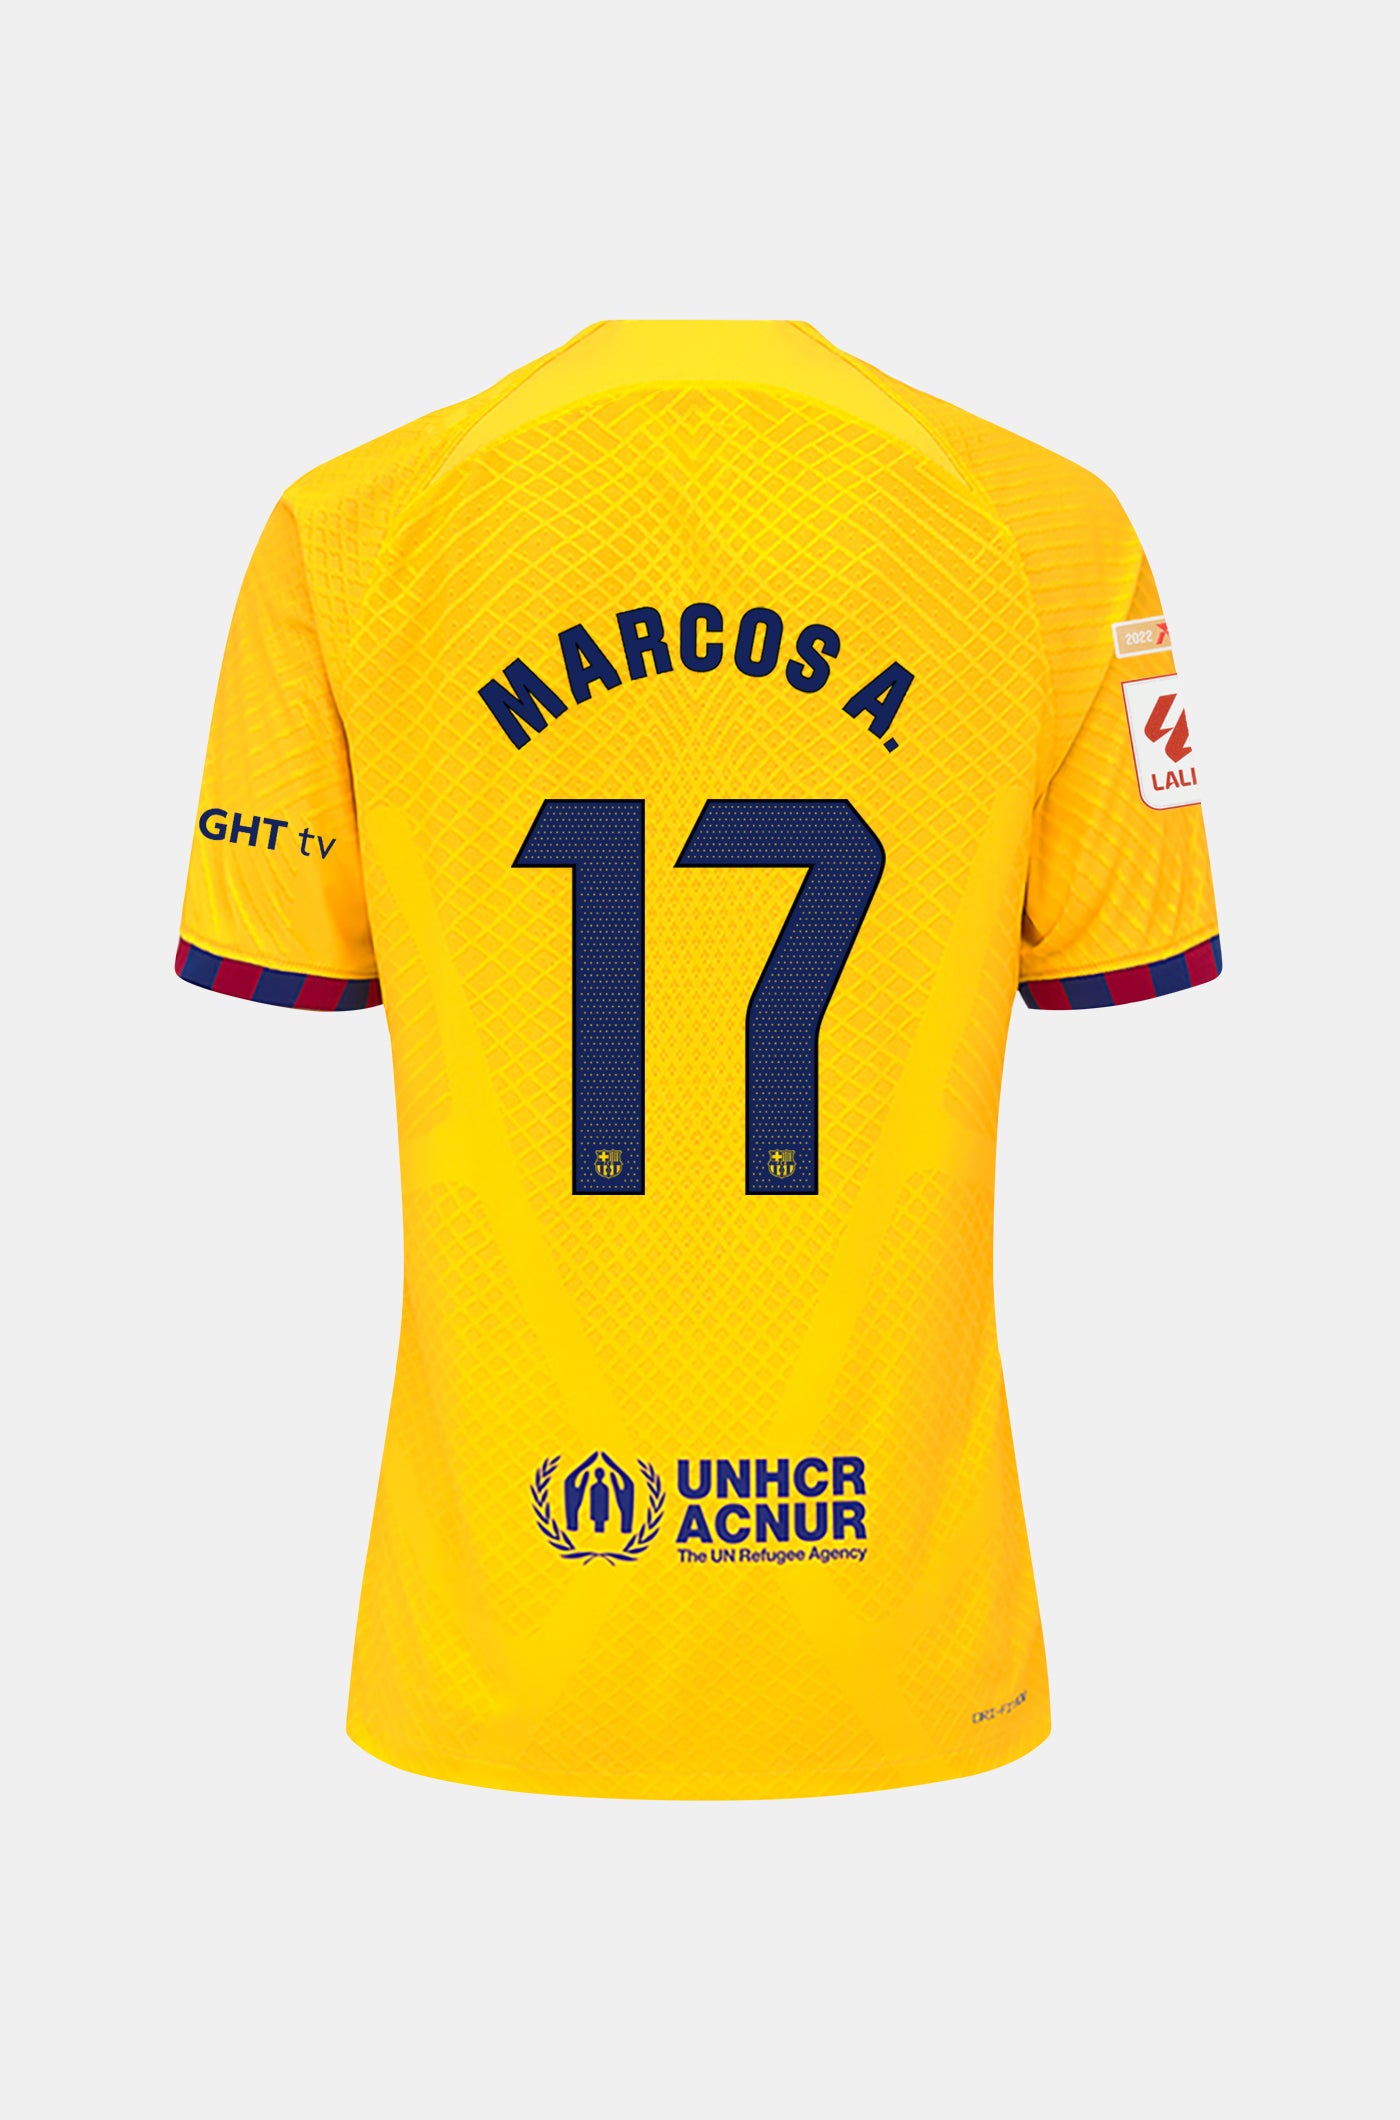 LFP FC Barcelona fourth shirt 23/24 Player’s Edition  - MARCOS A.